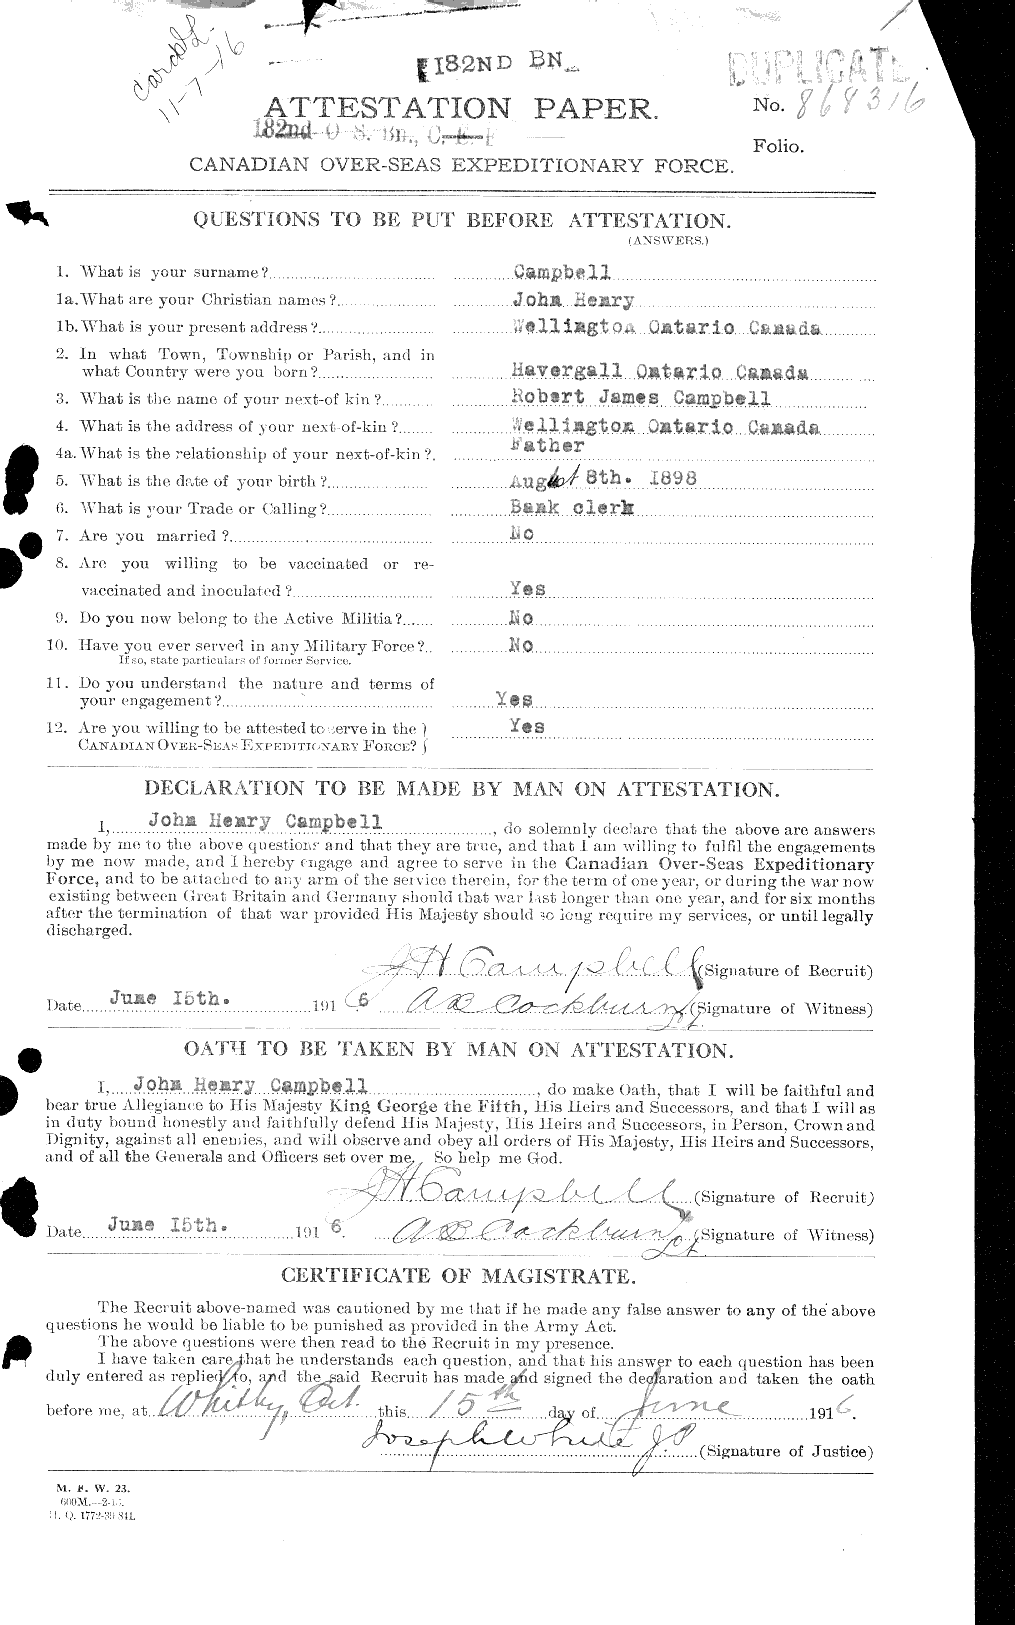 Personnel Records of the First World War - CEF 008532a